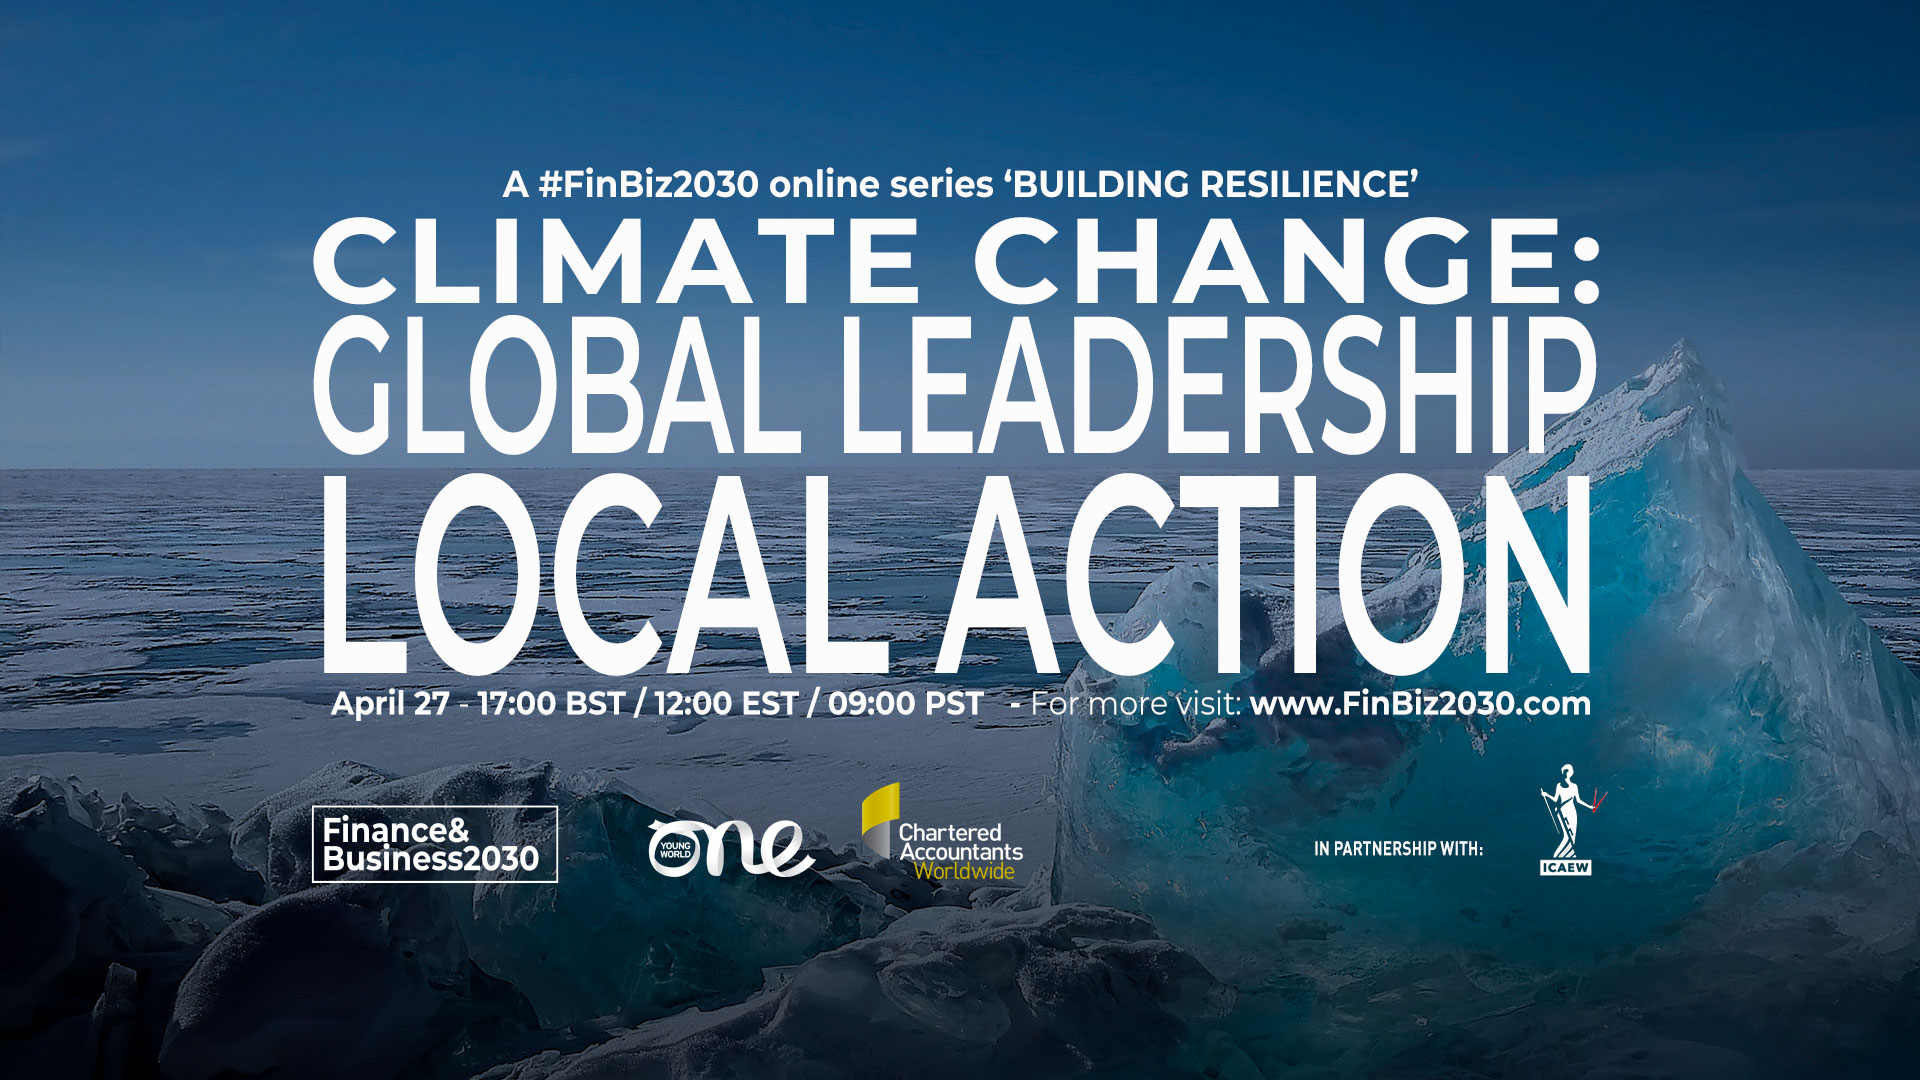 Building Resilience: Climate Change: Global Leadership Local Action